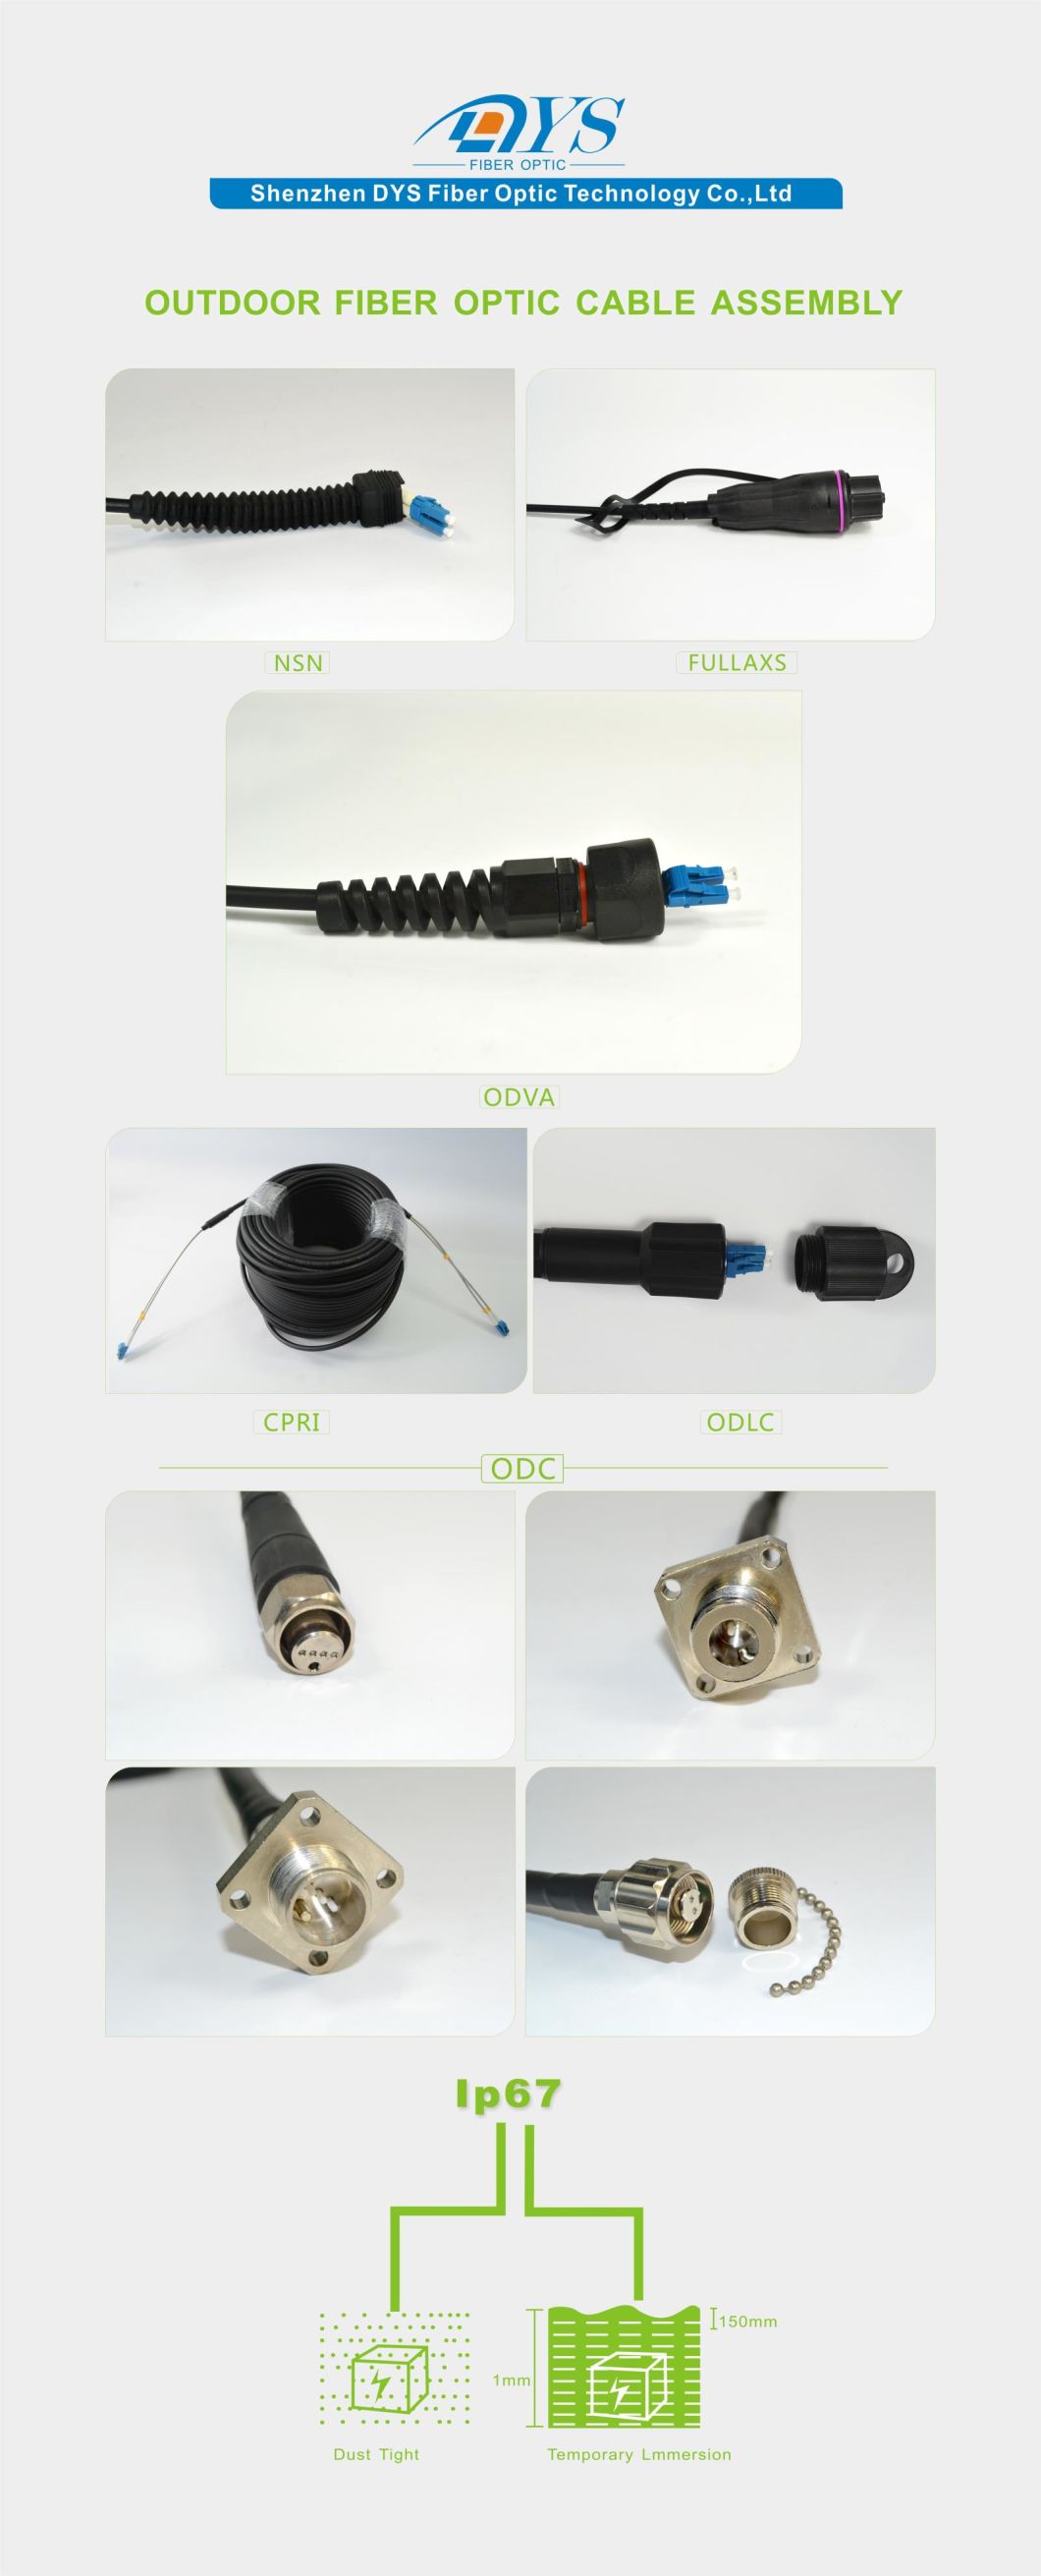 Duplex Nsn-Nsn Outdoor Cable Assembly for Nokia Equipment